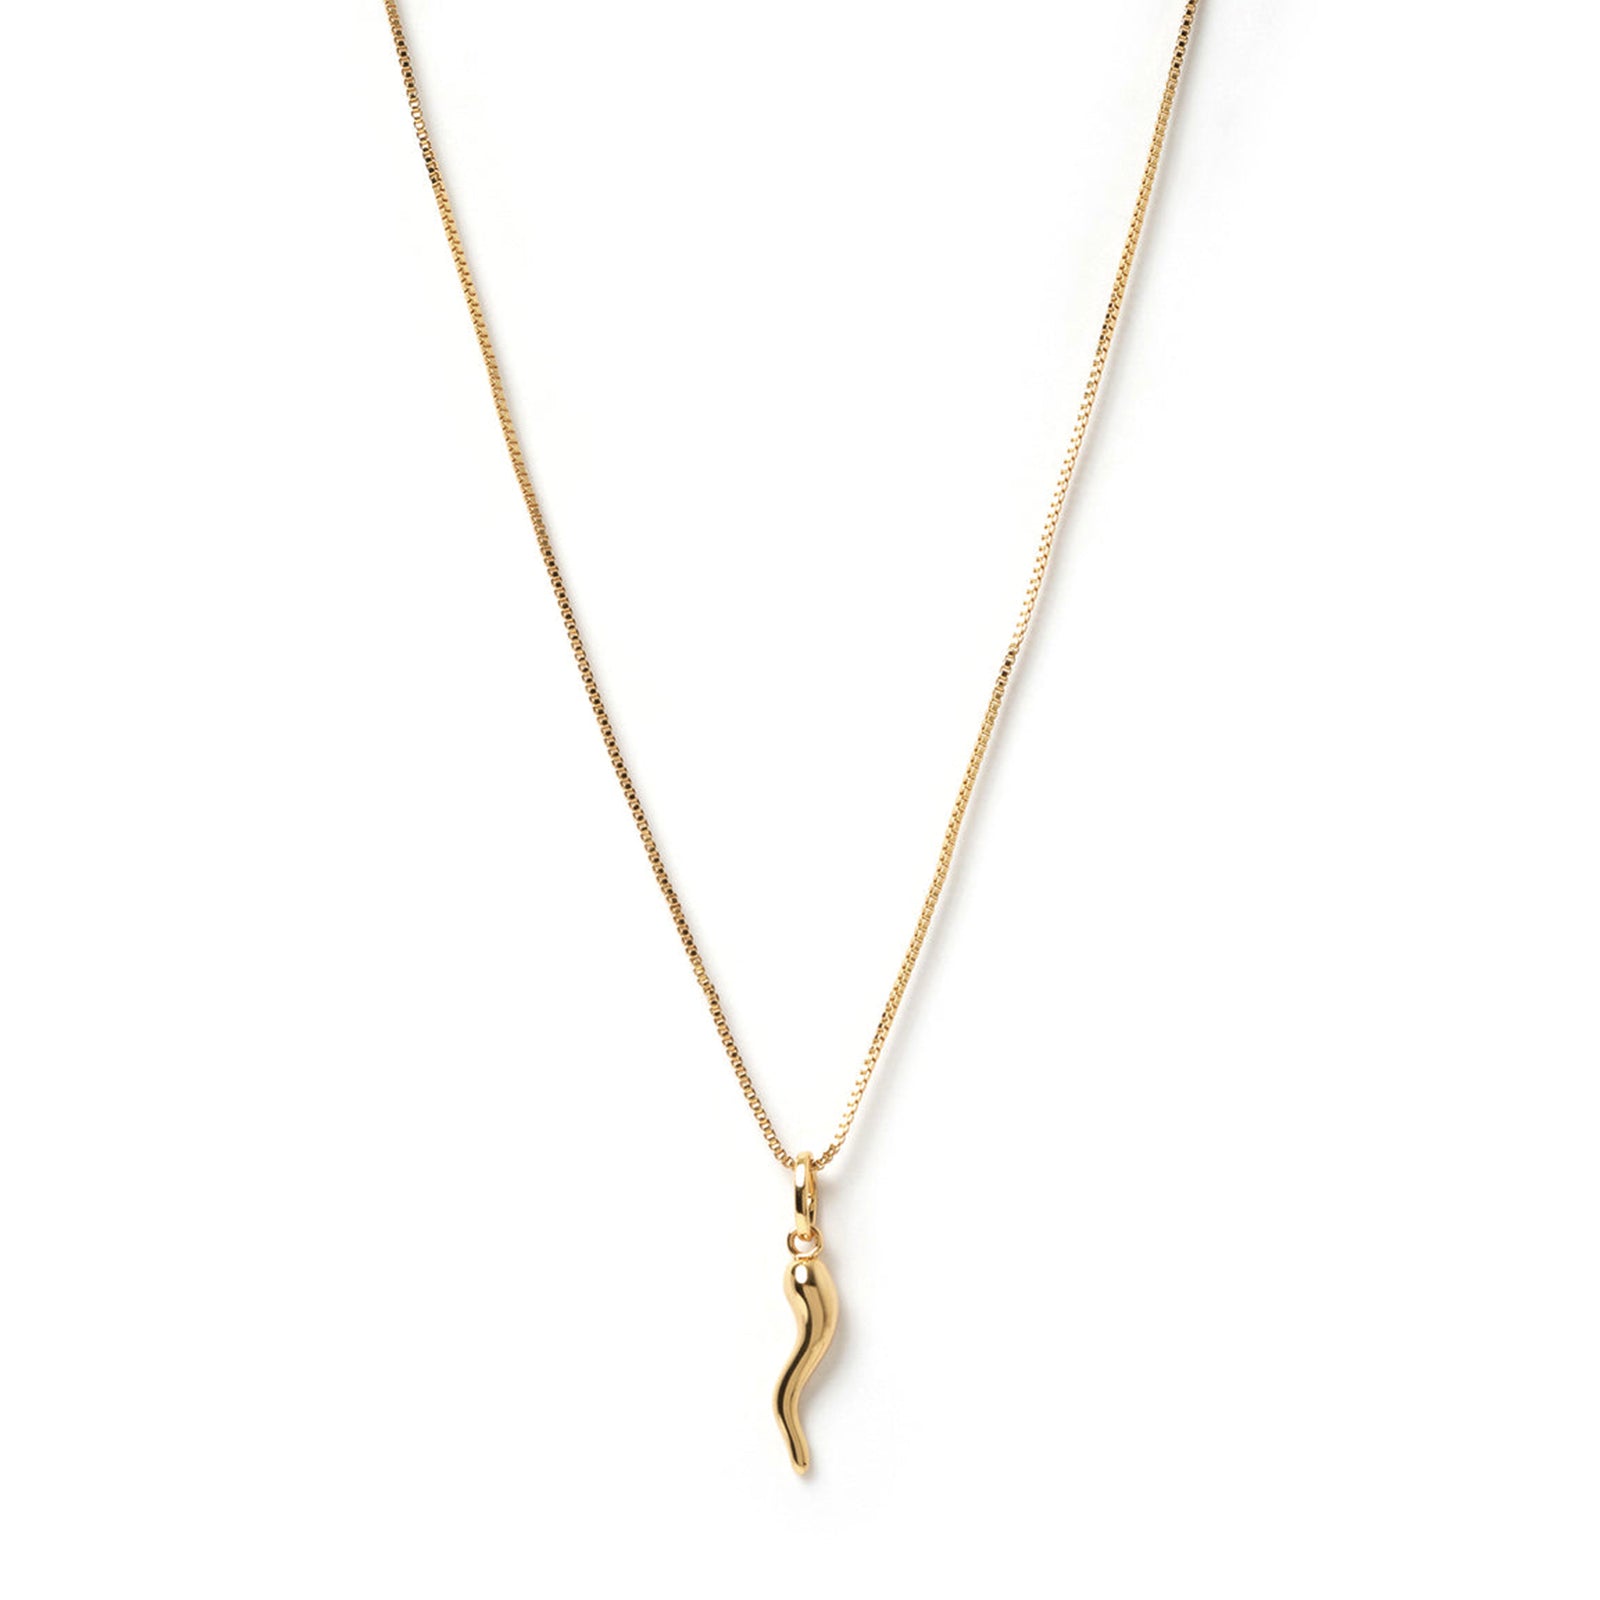 Cornicello Gold Charm Necklace - Large